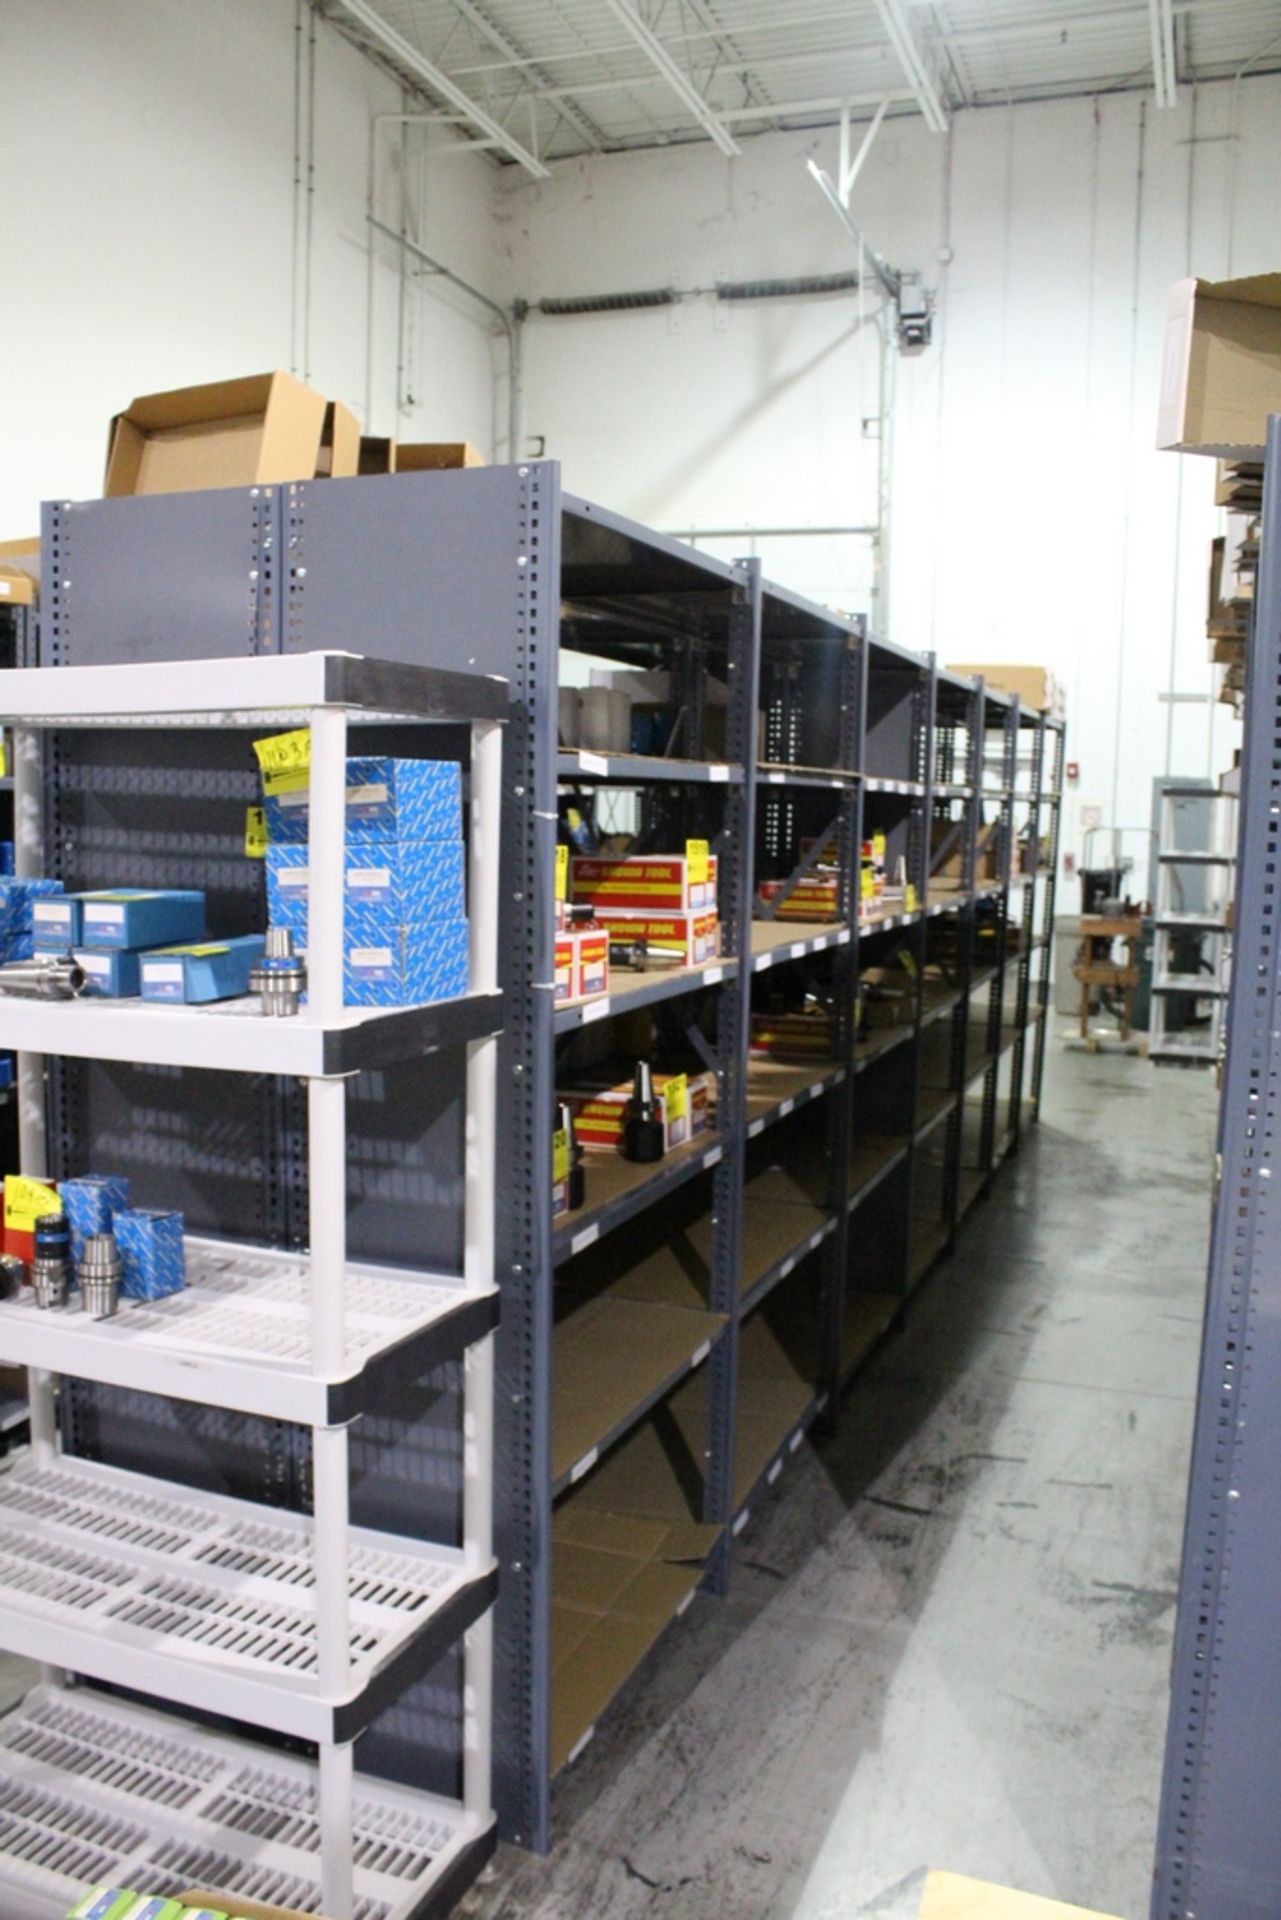 DOUBLE SIDED ADJUSTABLE STEEL SHELVING UNIT - 7' X 21' X 38"